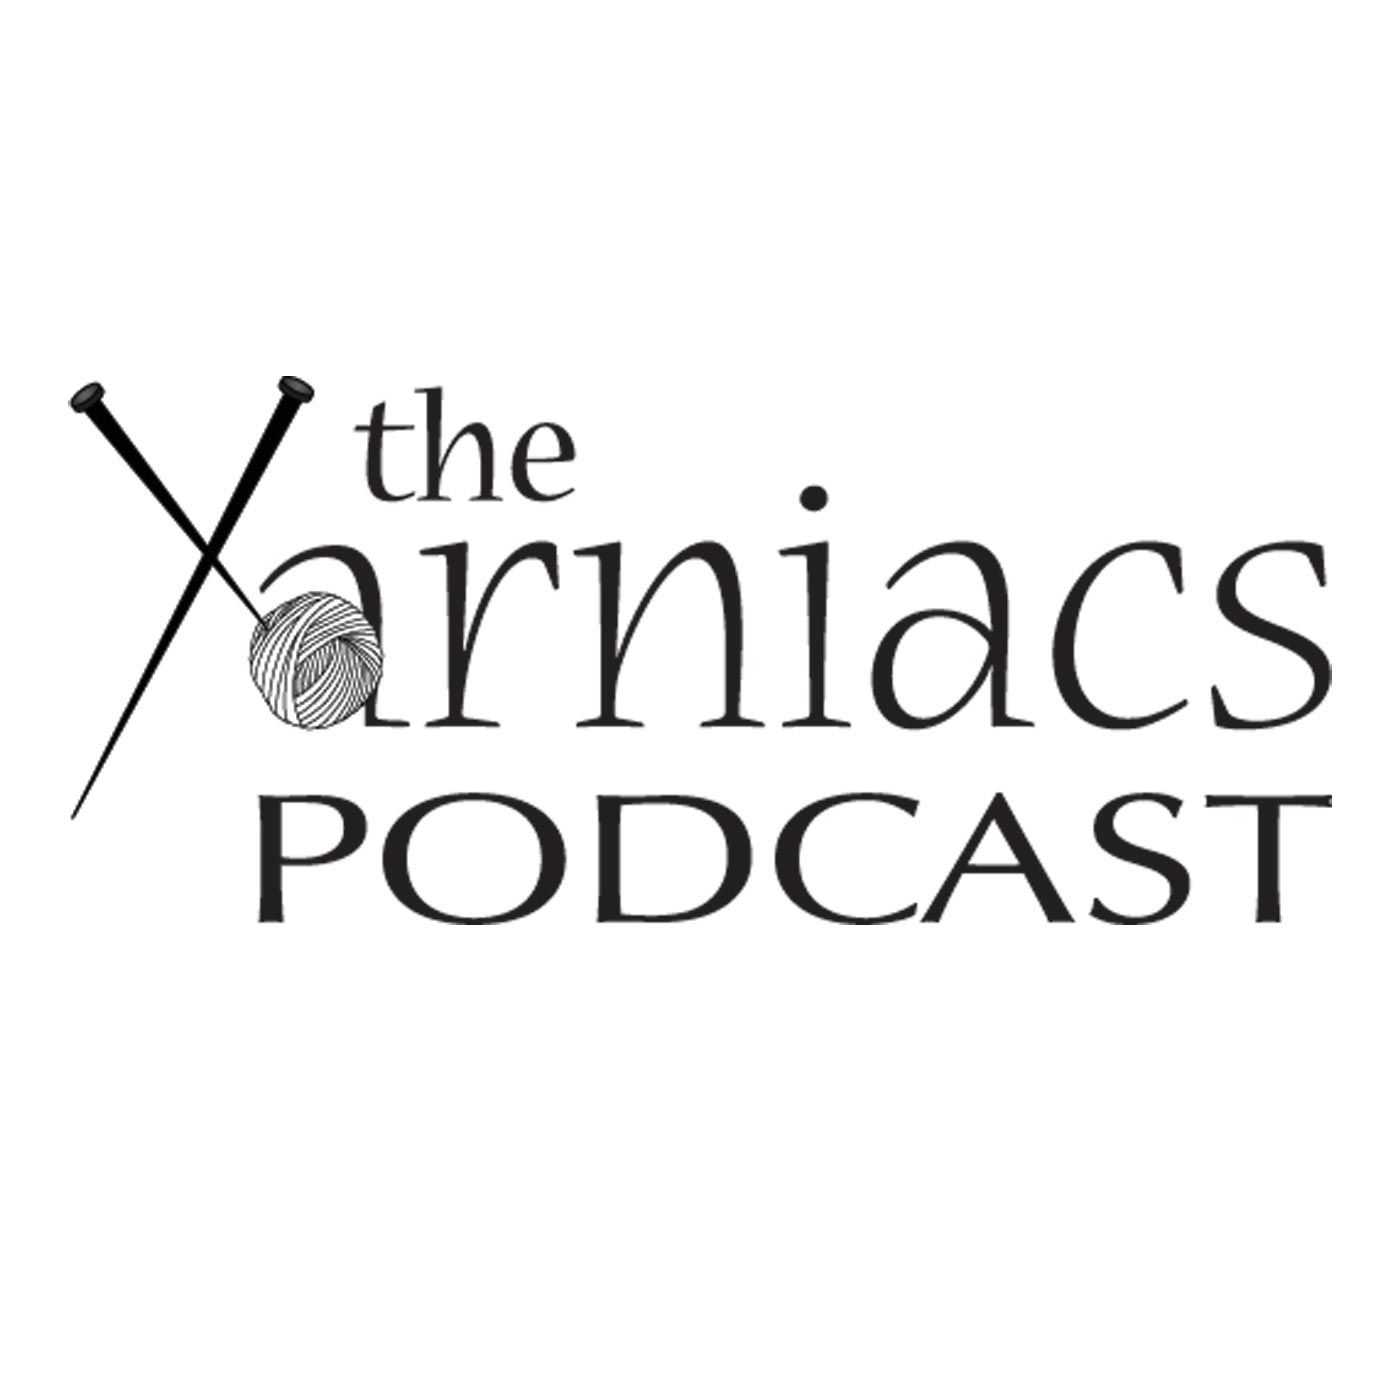 The Yarniacs Episode 256: Knitting With All the Needles!